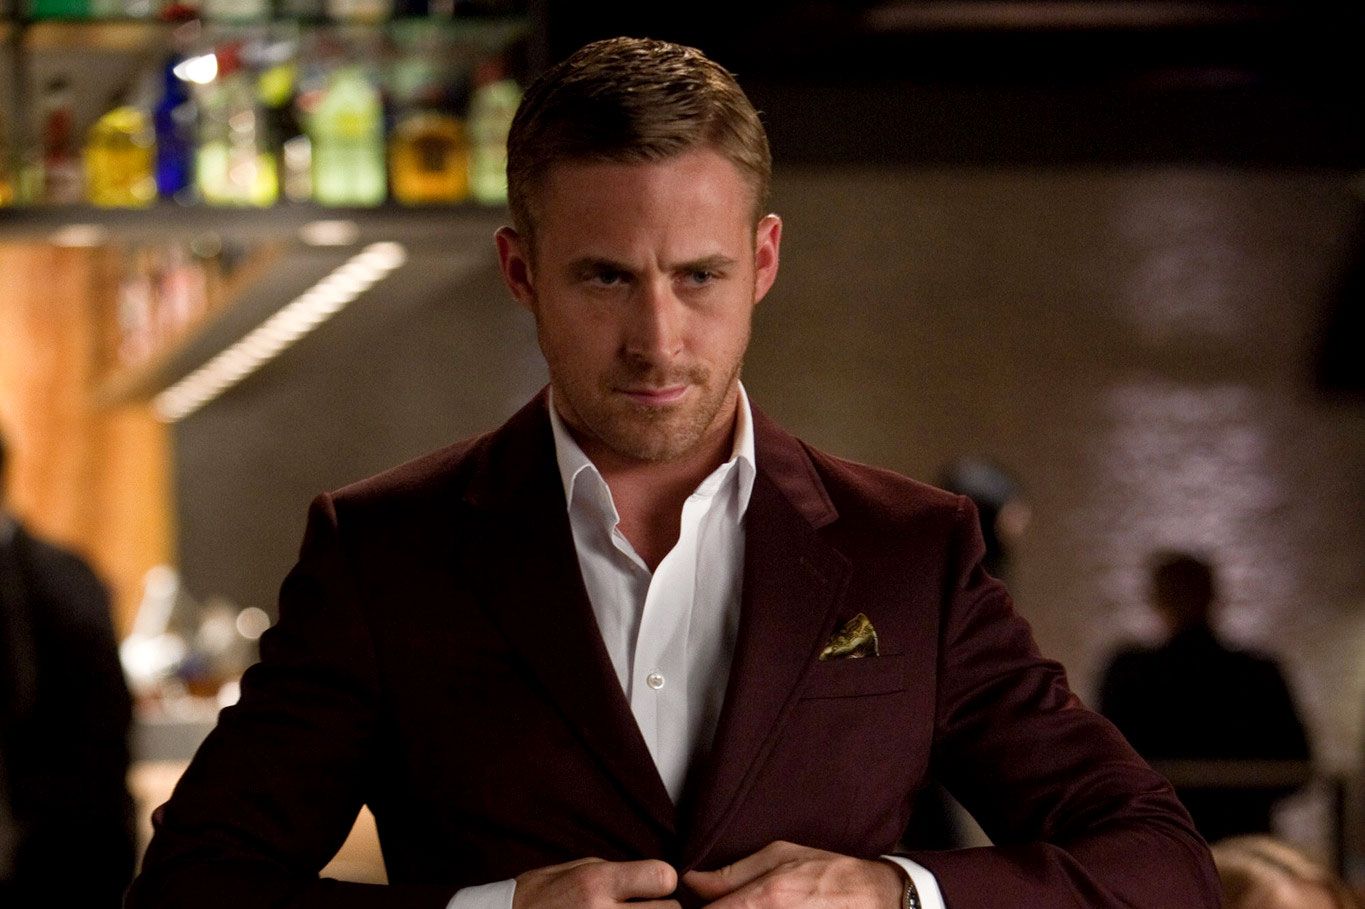 The Ryan Gosling Haircut: The Art of Subtle Transformation